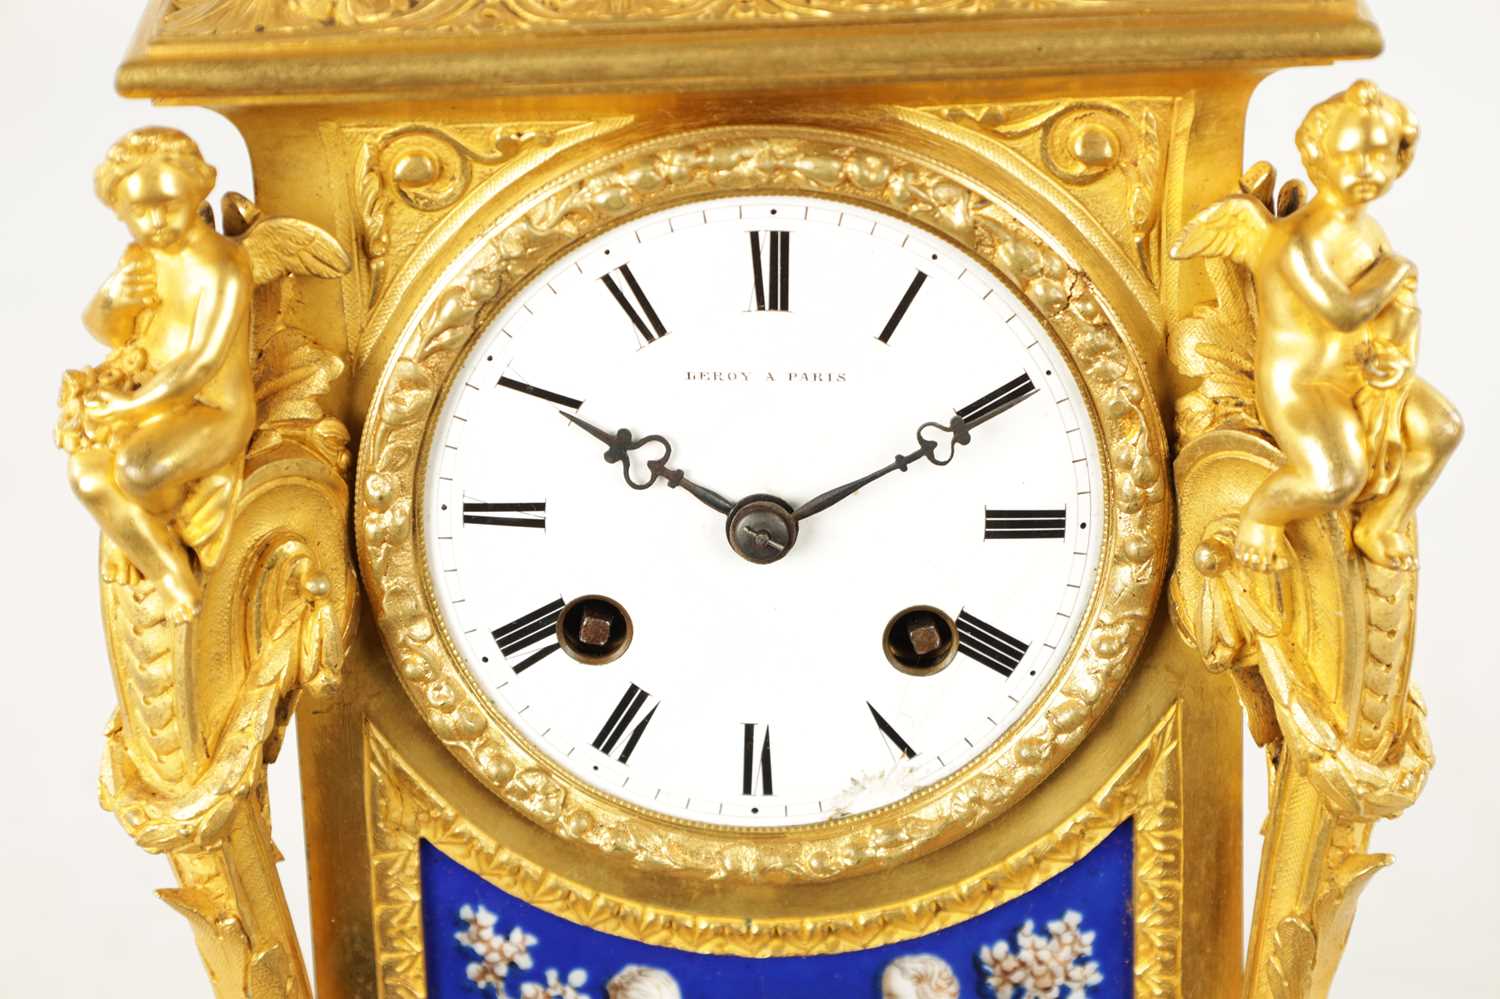 LEROY A PARIS. A 19TH CENTURY FRENCH ORMOLU AND PORCELAIN PANELLED MANTEL CLOCK - Image 2 of 10